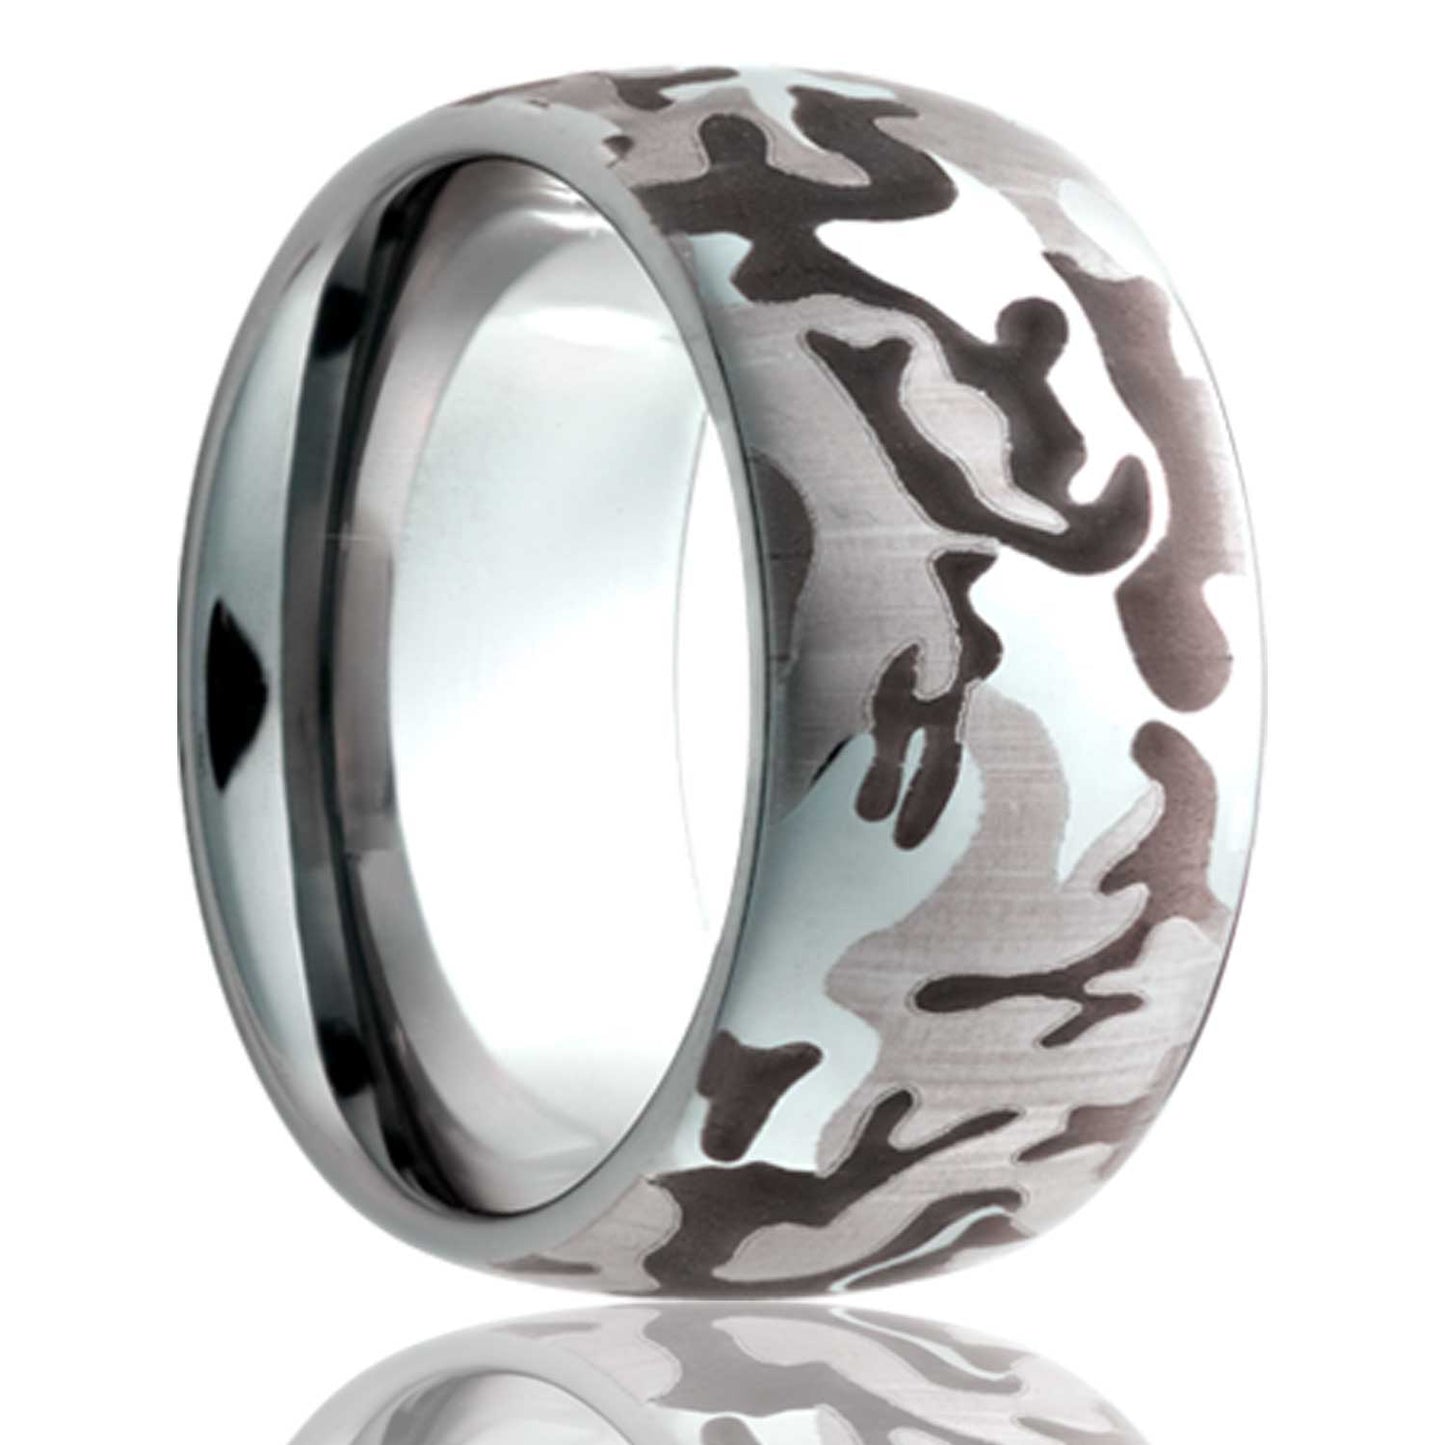 A engraved camo domed titanium wedding band displayed on a neutral white background.